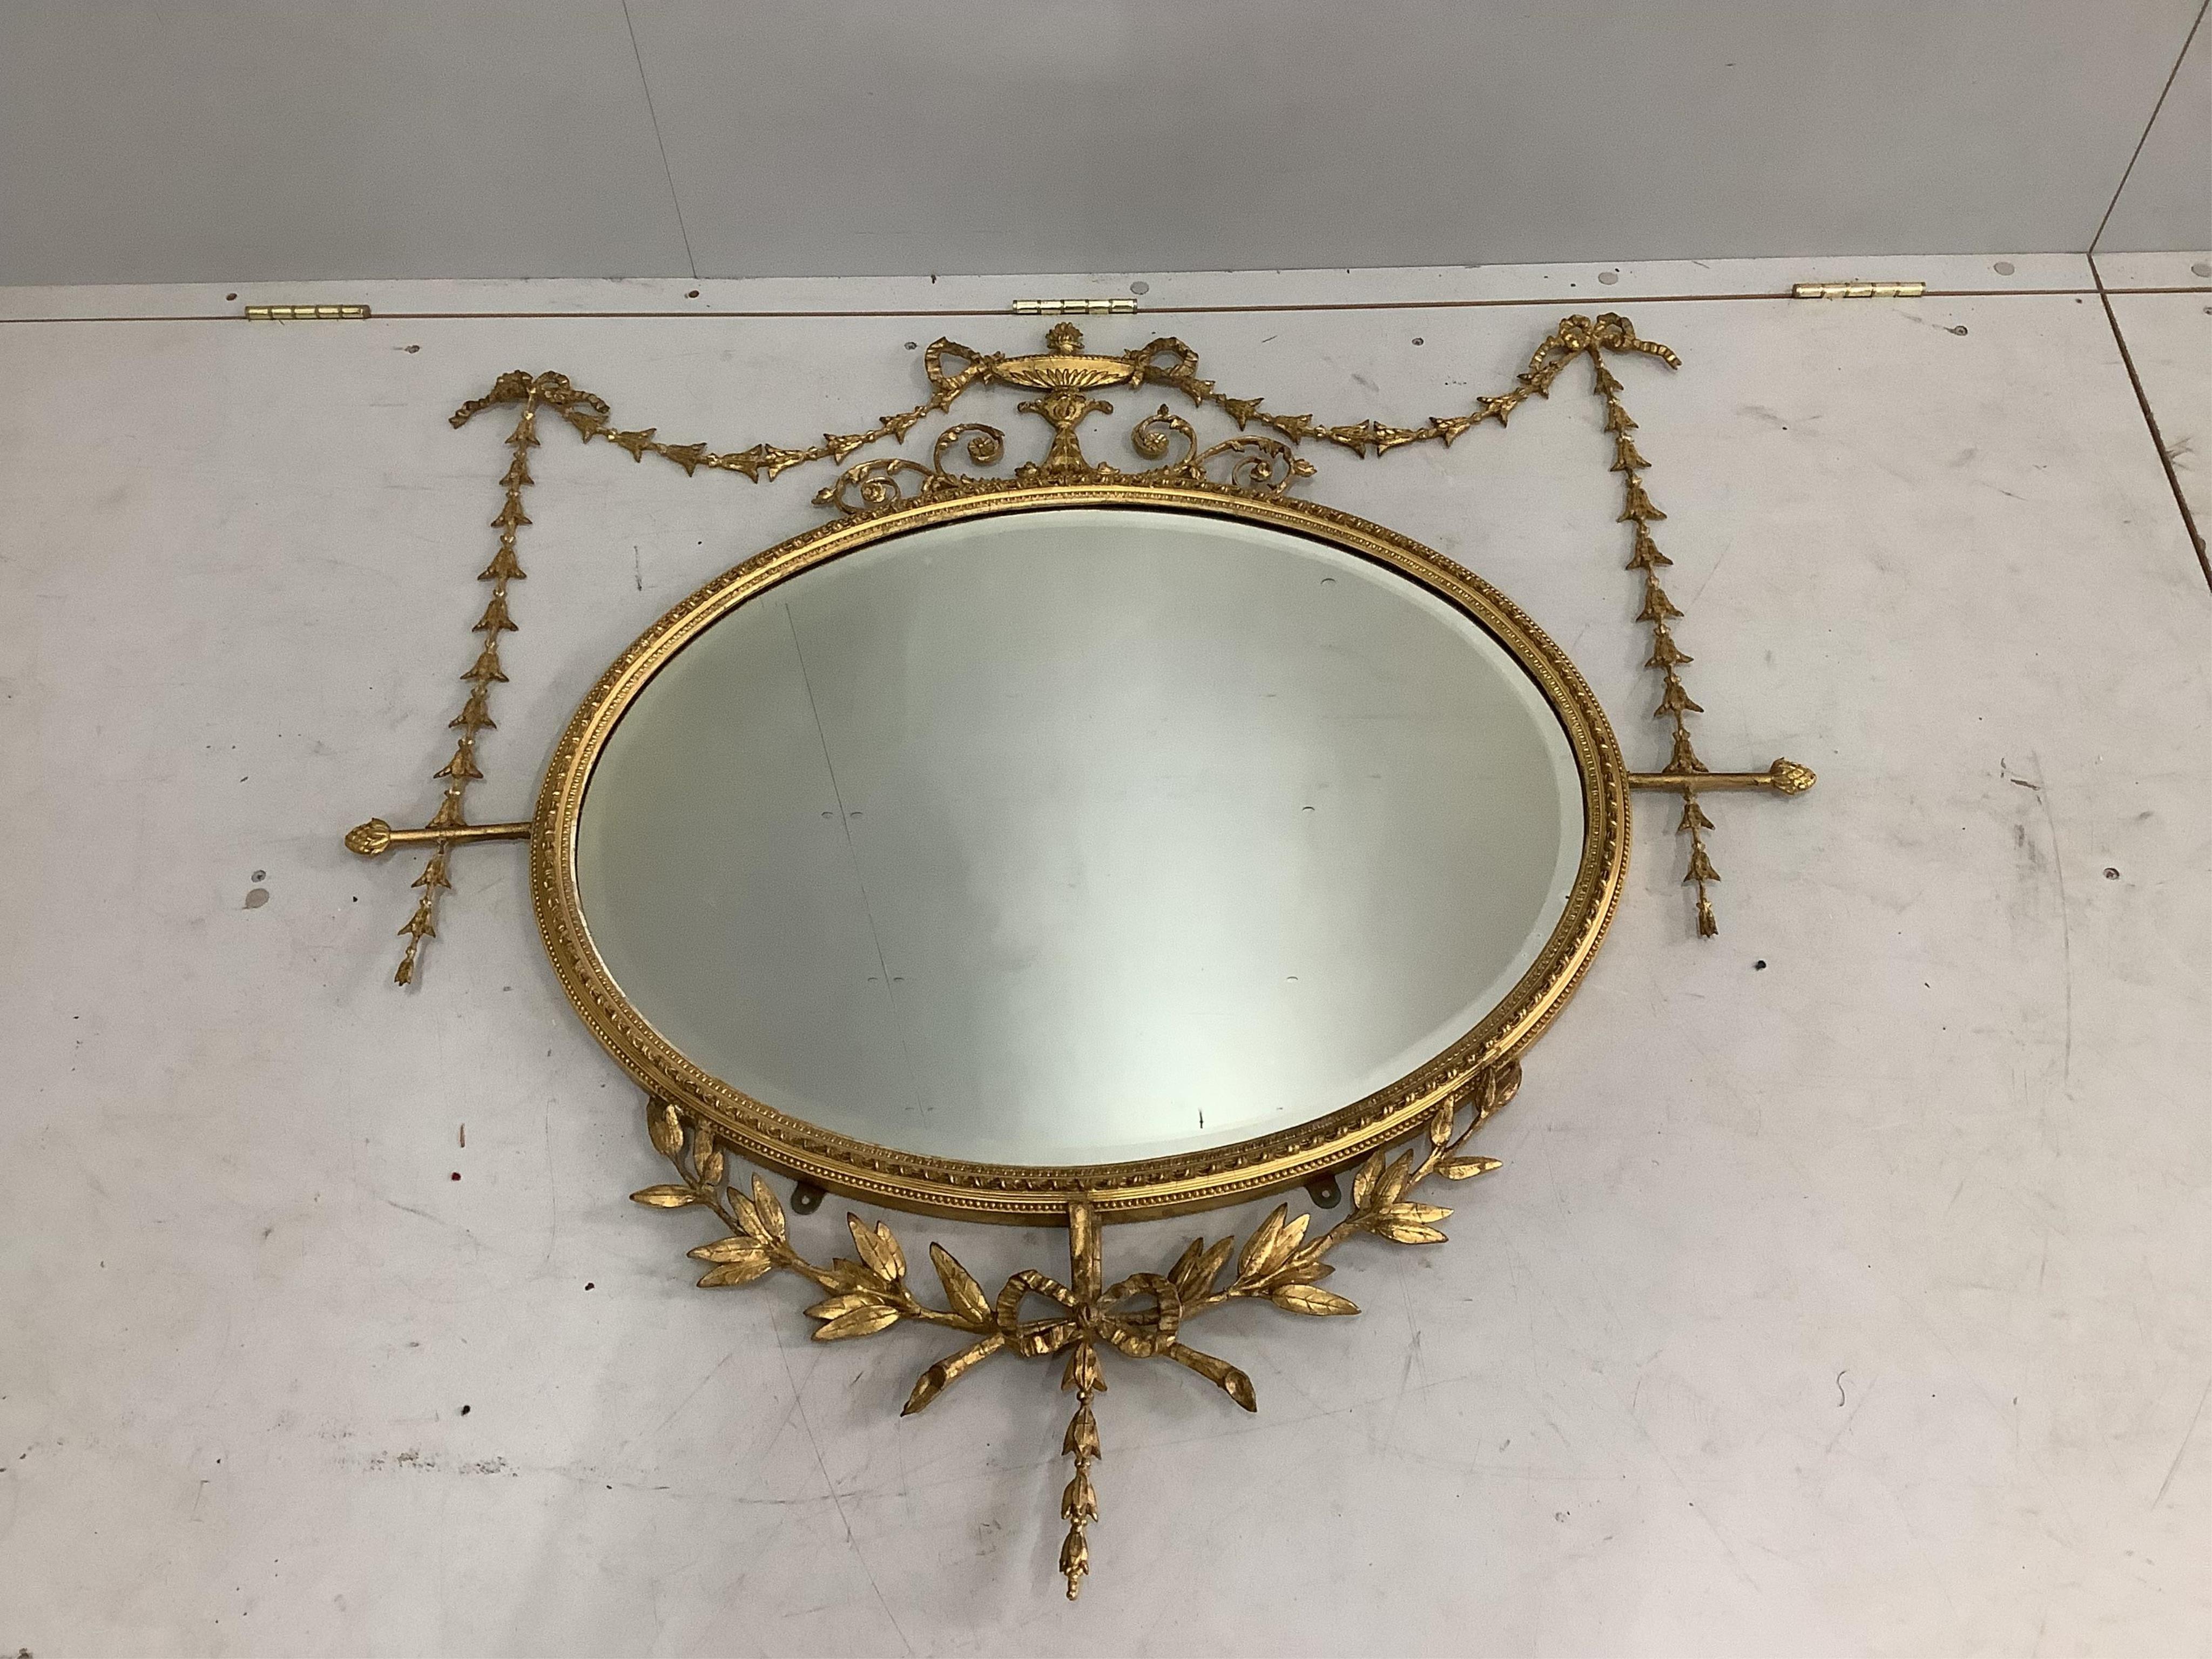 An Edwardian Sheraton style oval giltwood and composition wall mirror, width 105cm, height 106cm. Condition - good